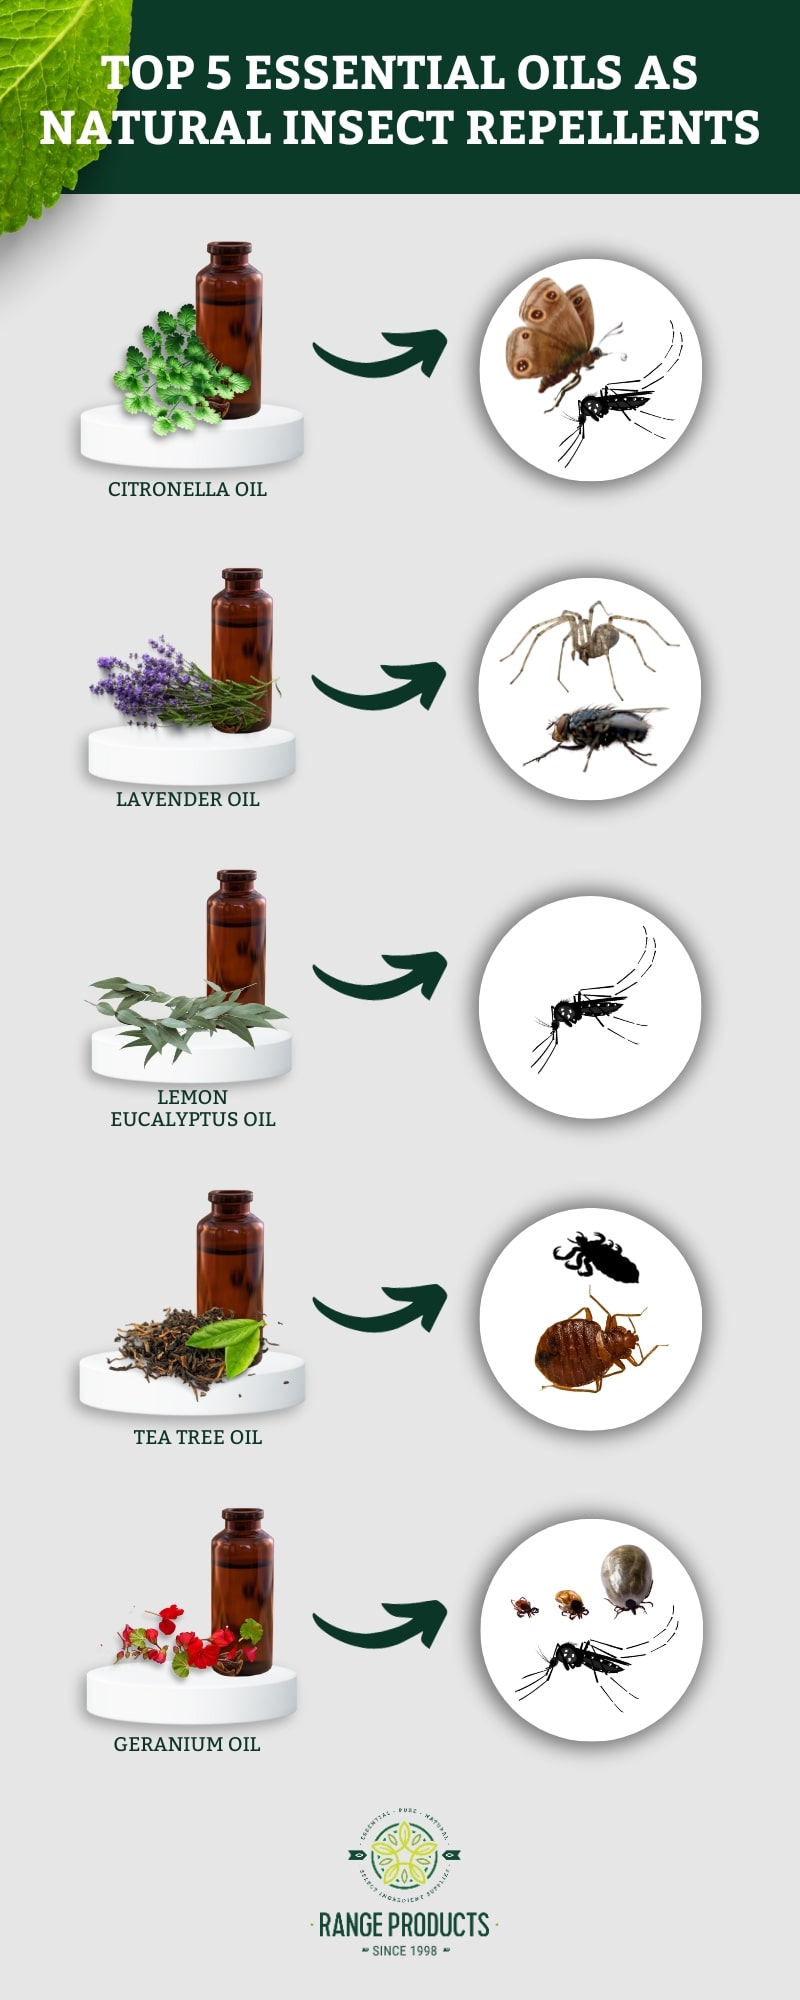 5 effective essential oils as natural insect repellents